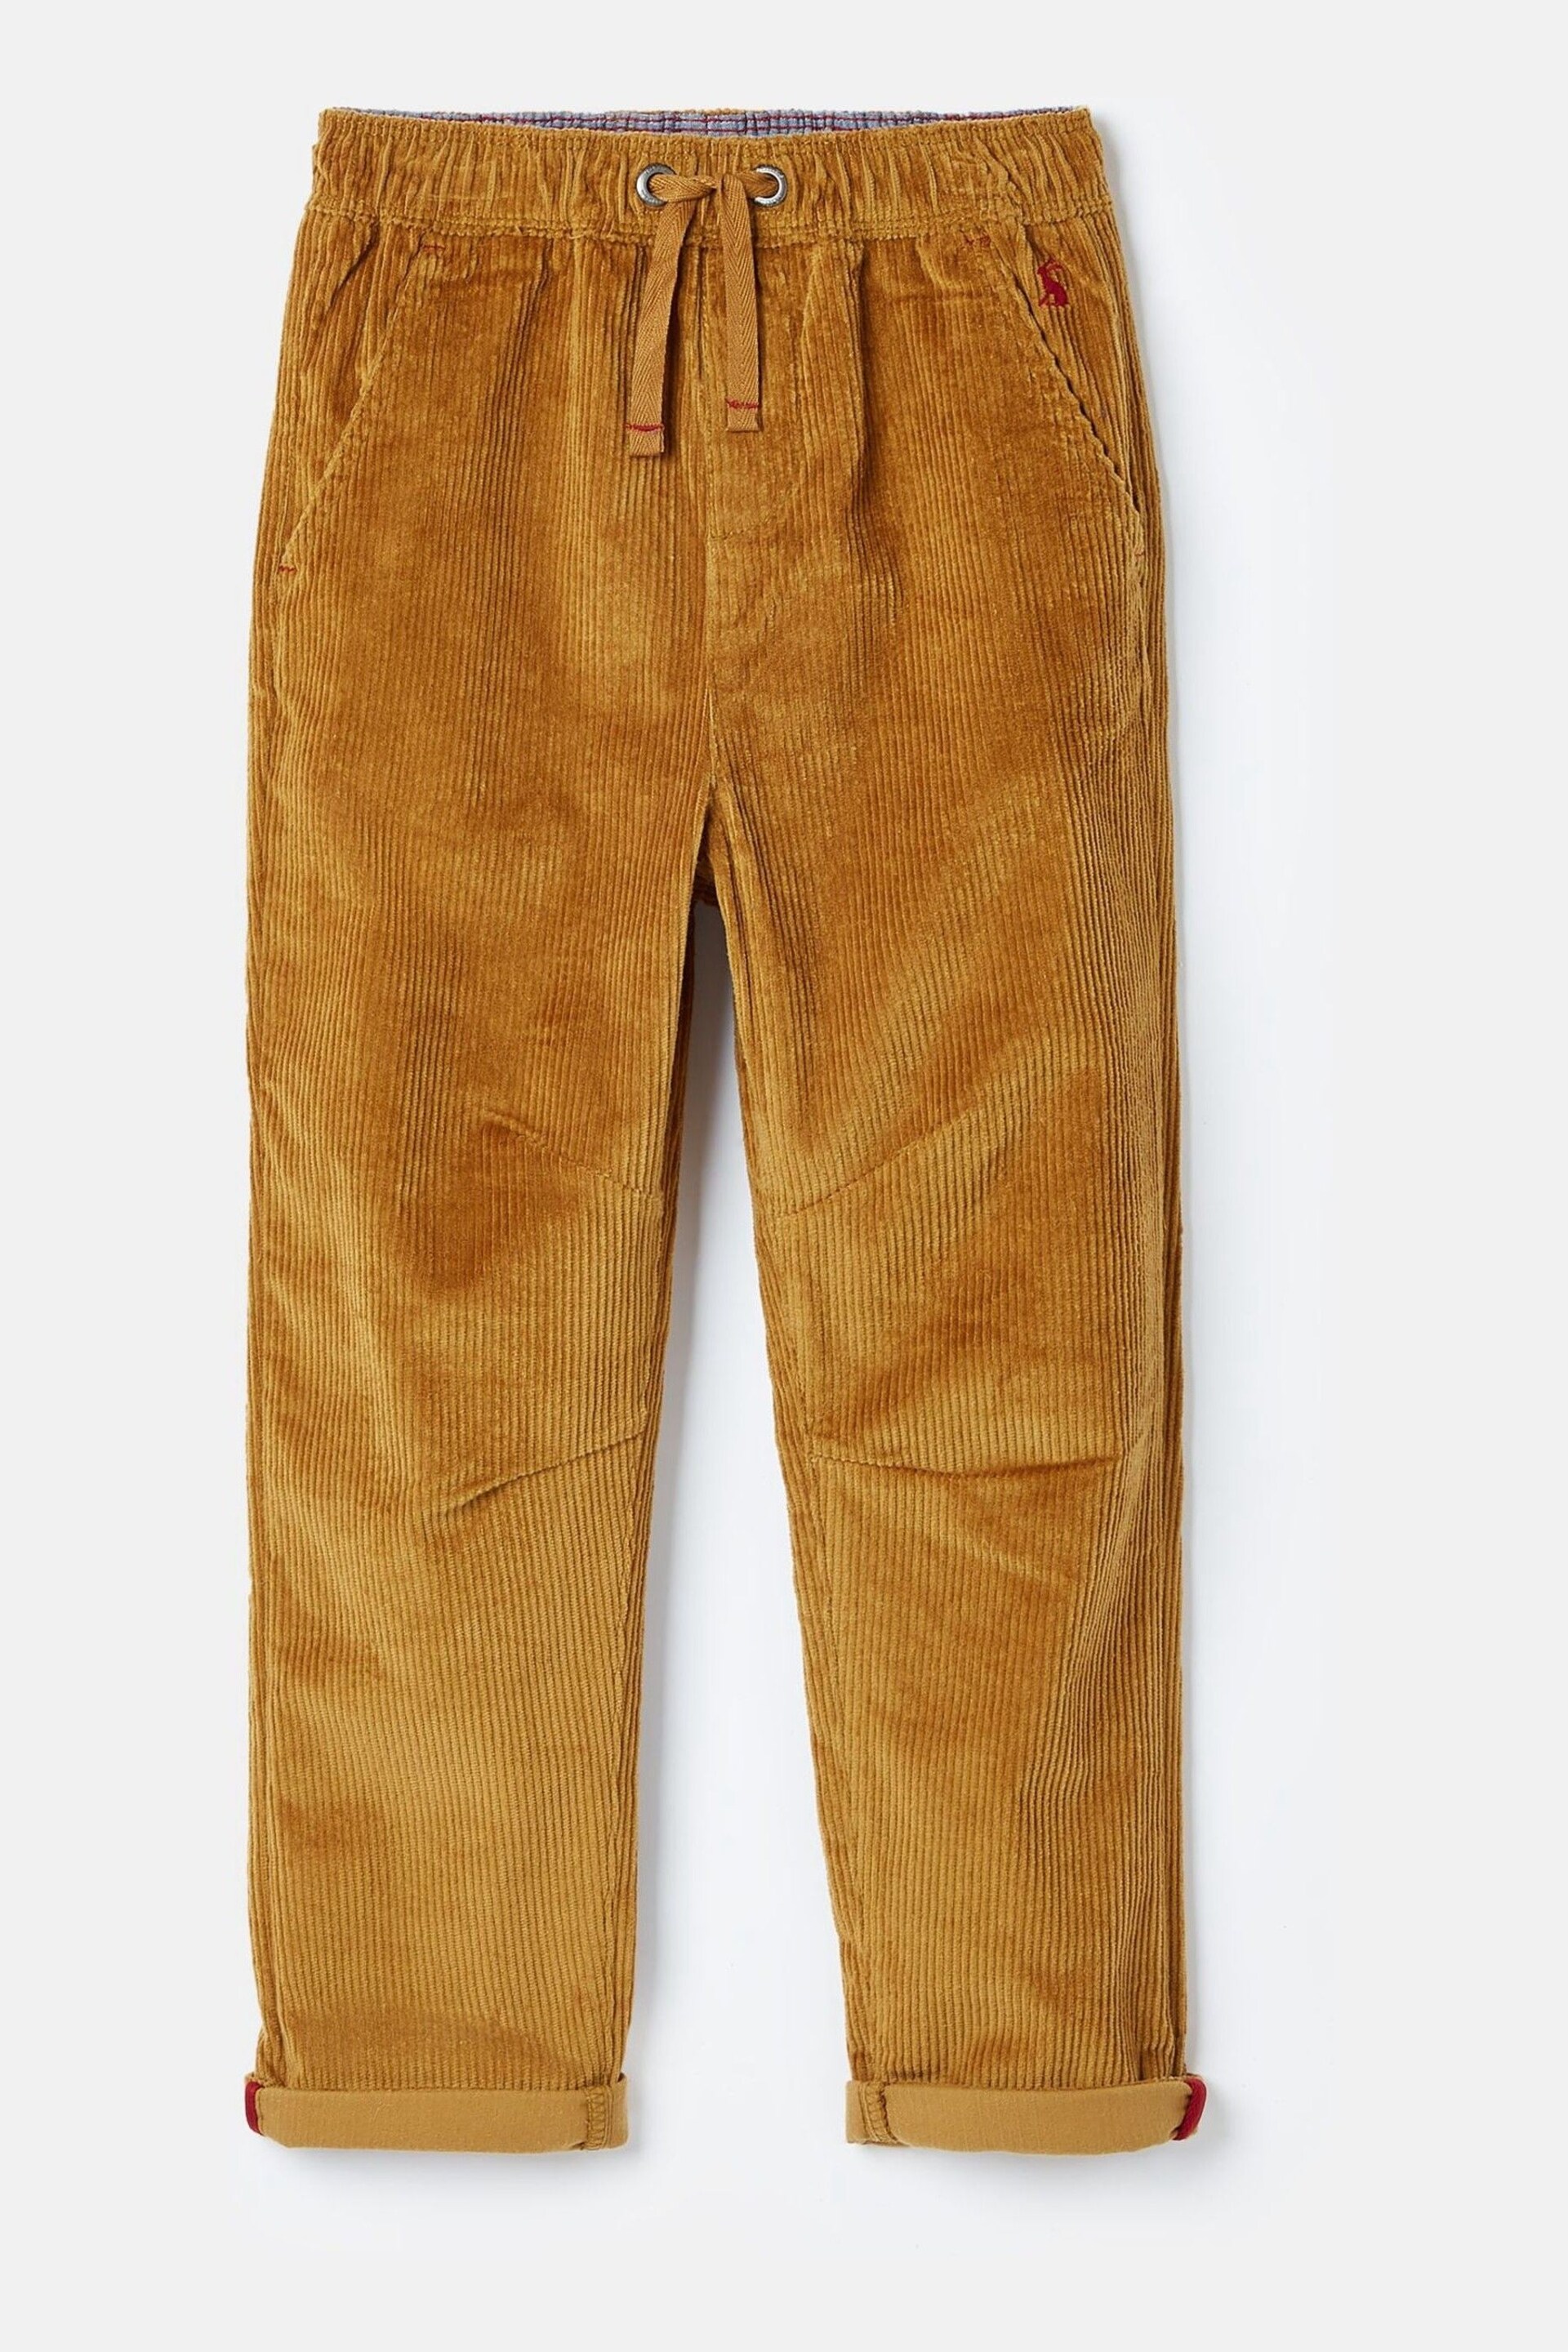 Joules Louis Brown Elasticated Waist Corduroy Trousers - Image 1 of 5